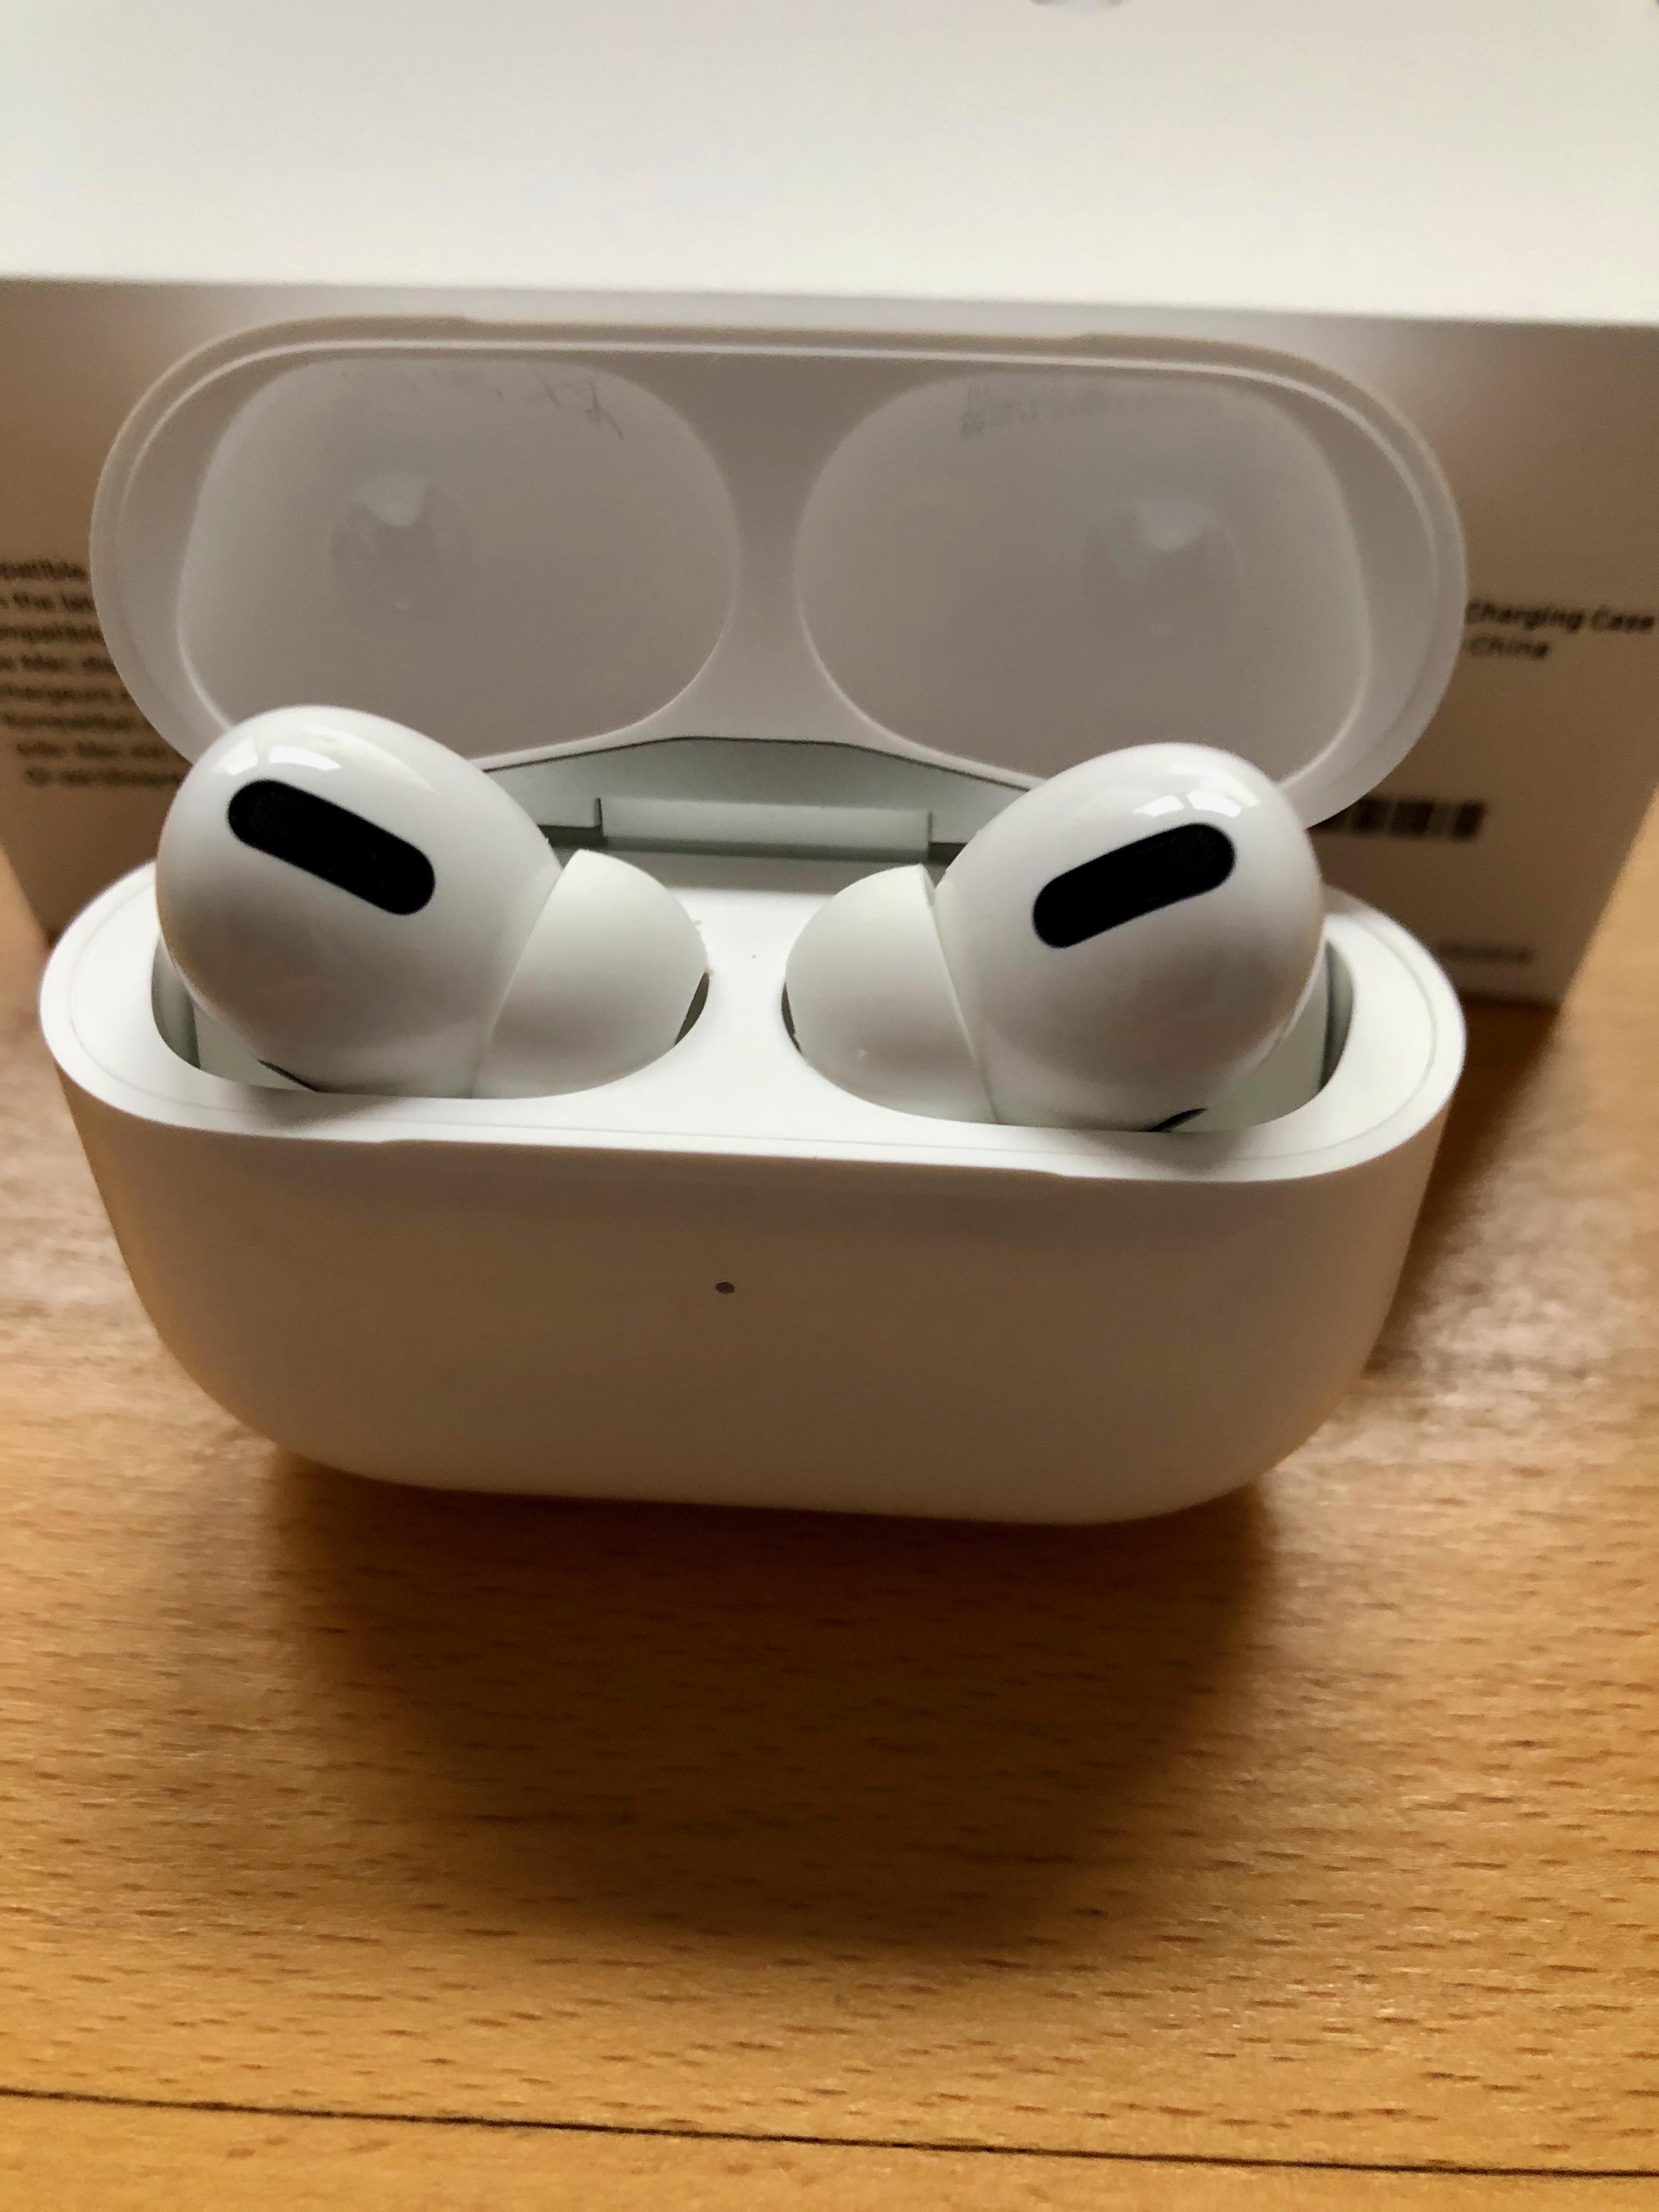 AirPods Pro in the charging case